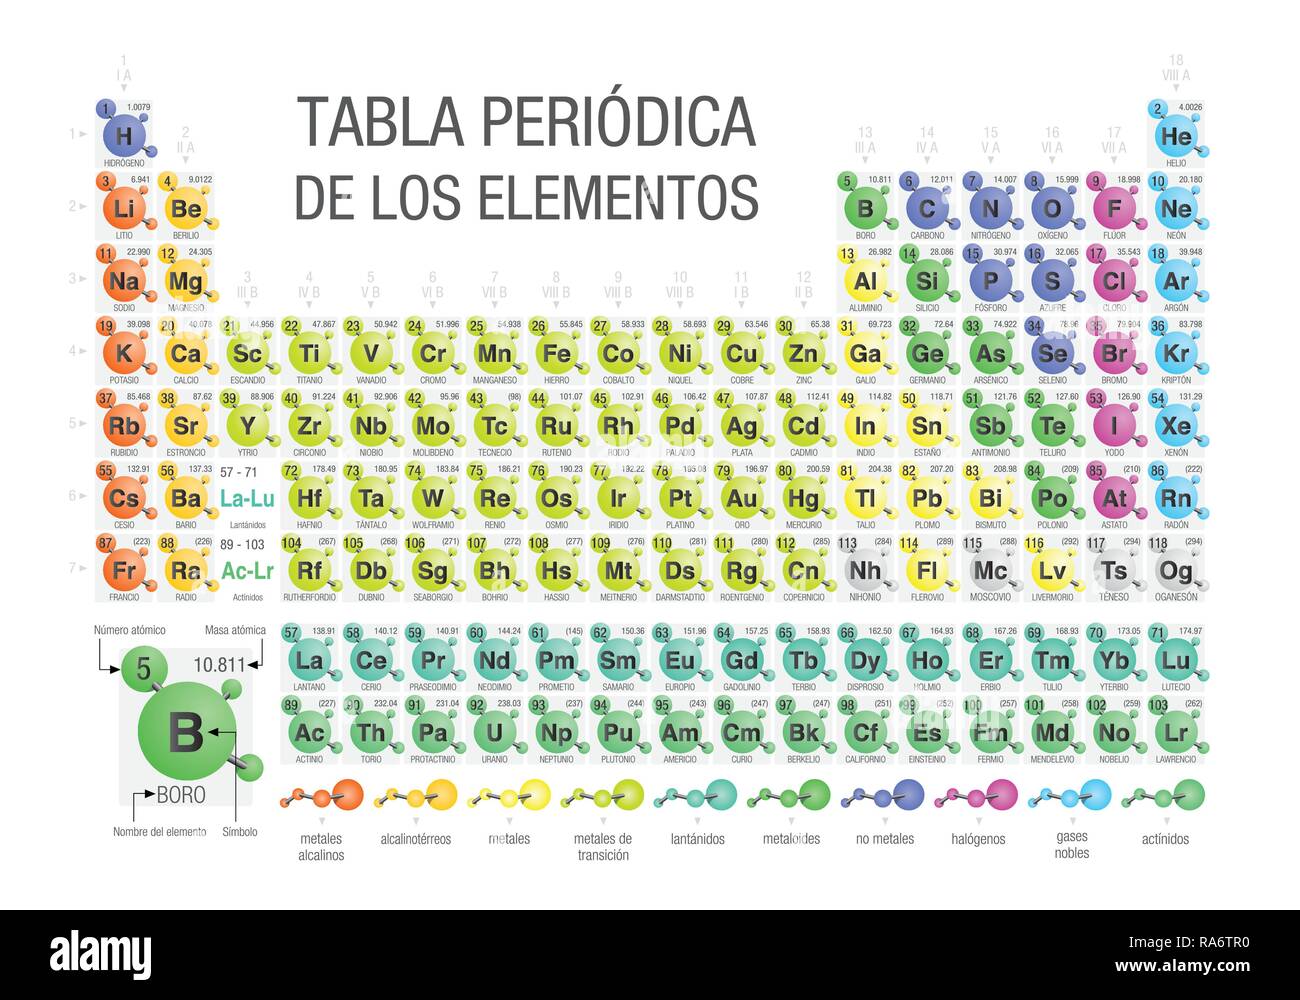 TABLA PERIODICA DE LOS ELEMENTOS -Periodic Table of the Elements in Spanish language- formed by molecules in white background with the 4 new elements Stock Vector